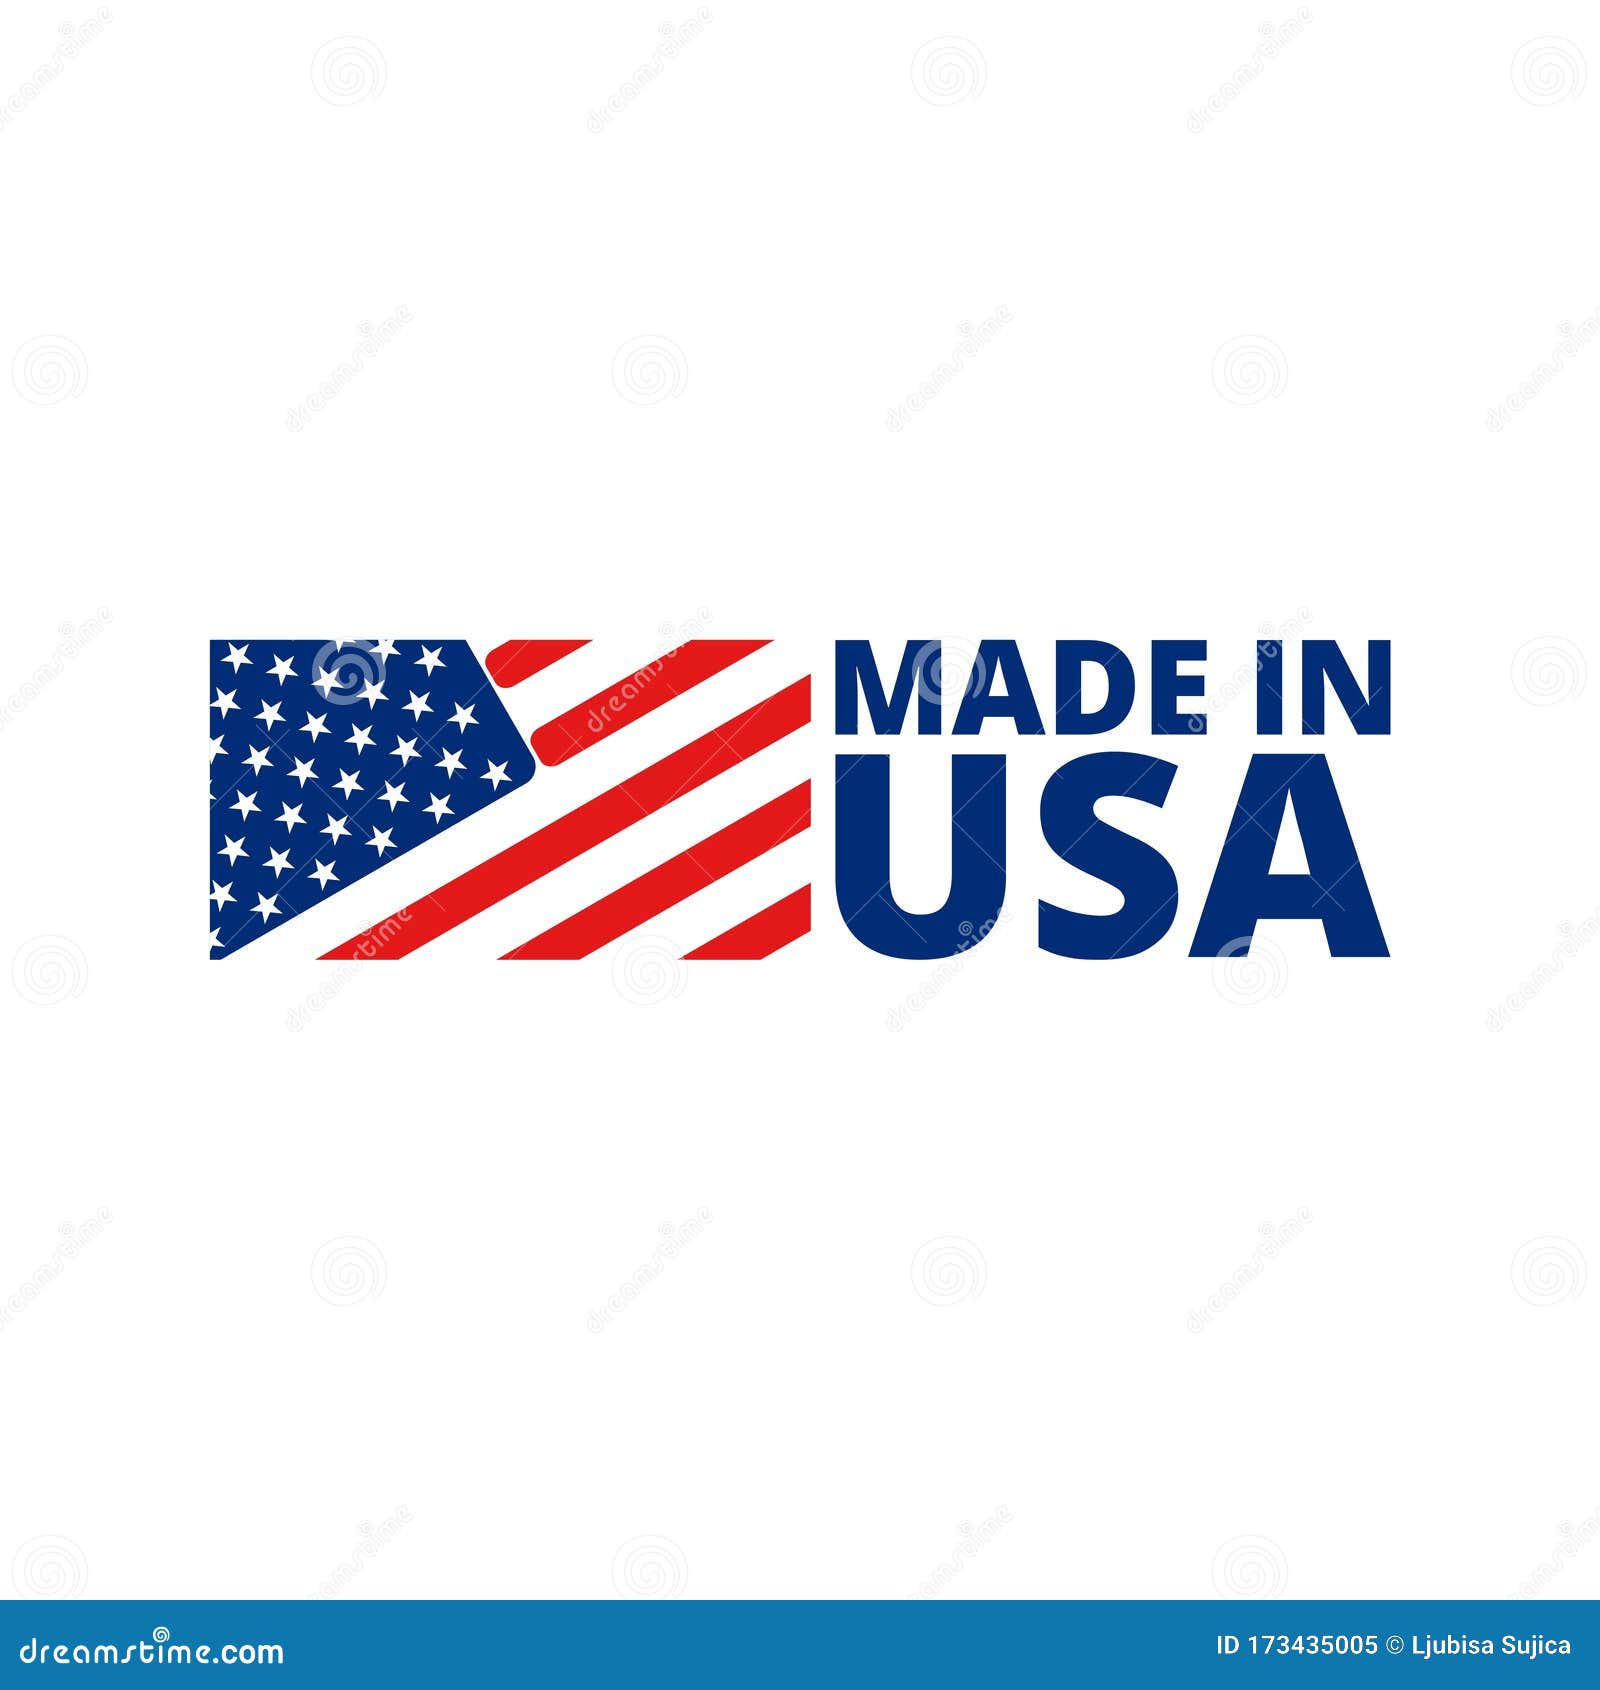 Made In USA Stamp Showing American Product Or Produce Stock Photo, Picture  And Royalty Free ImageImage 14081104.